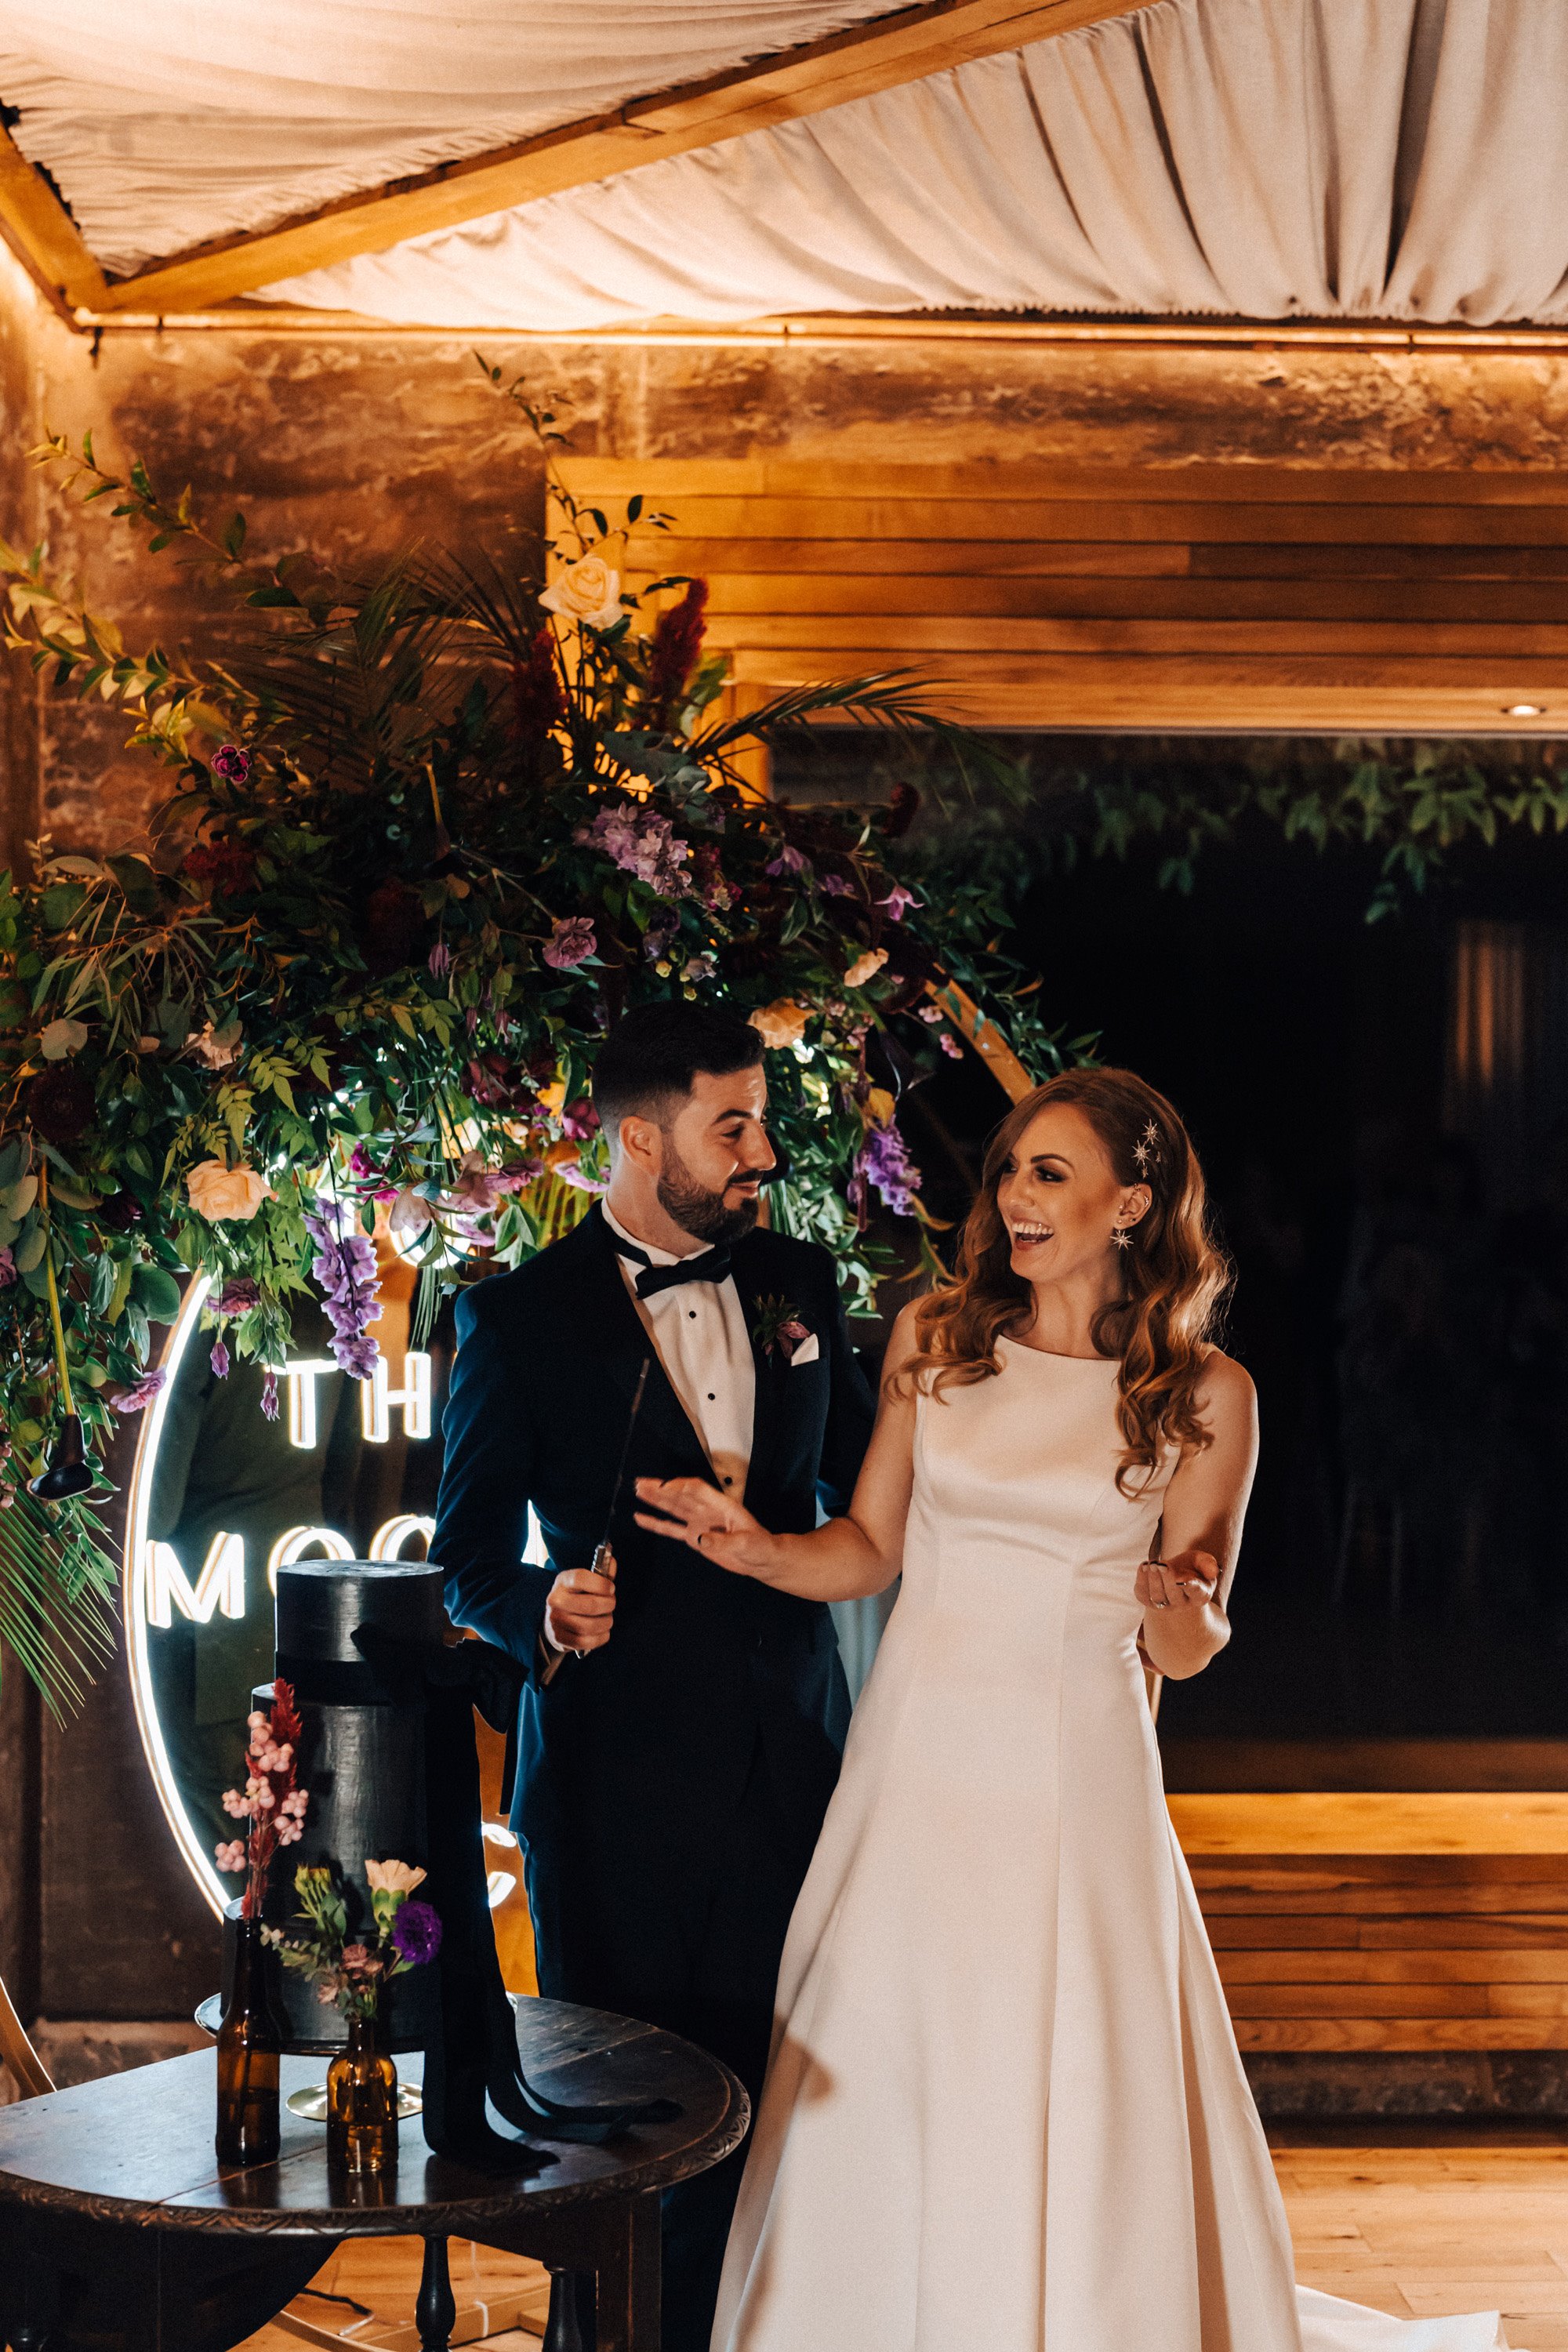 Witchy wedding ideas from a real life october wedding with black wedding cake and celestial details at sustainable wedding venue elmore court in gloucester